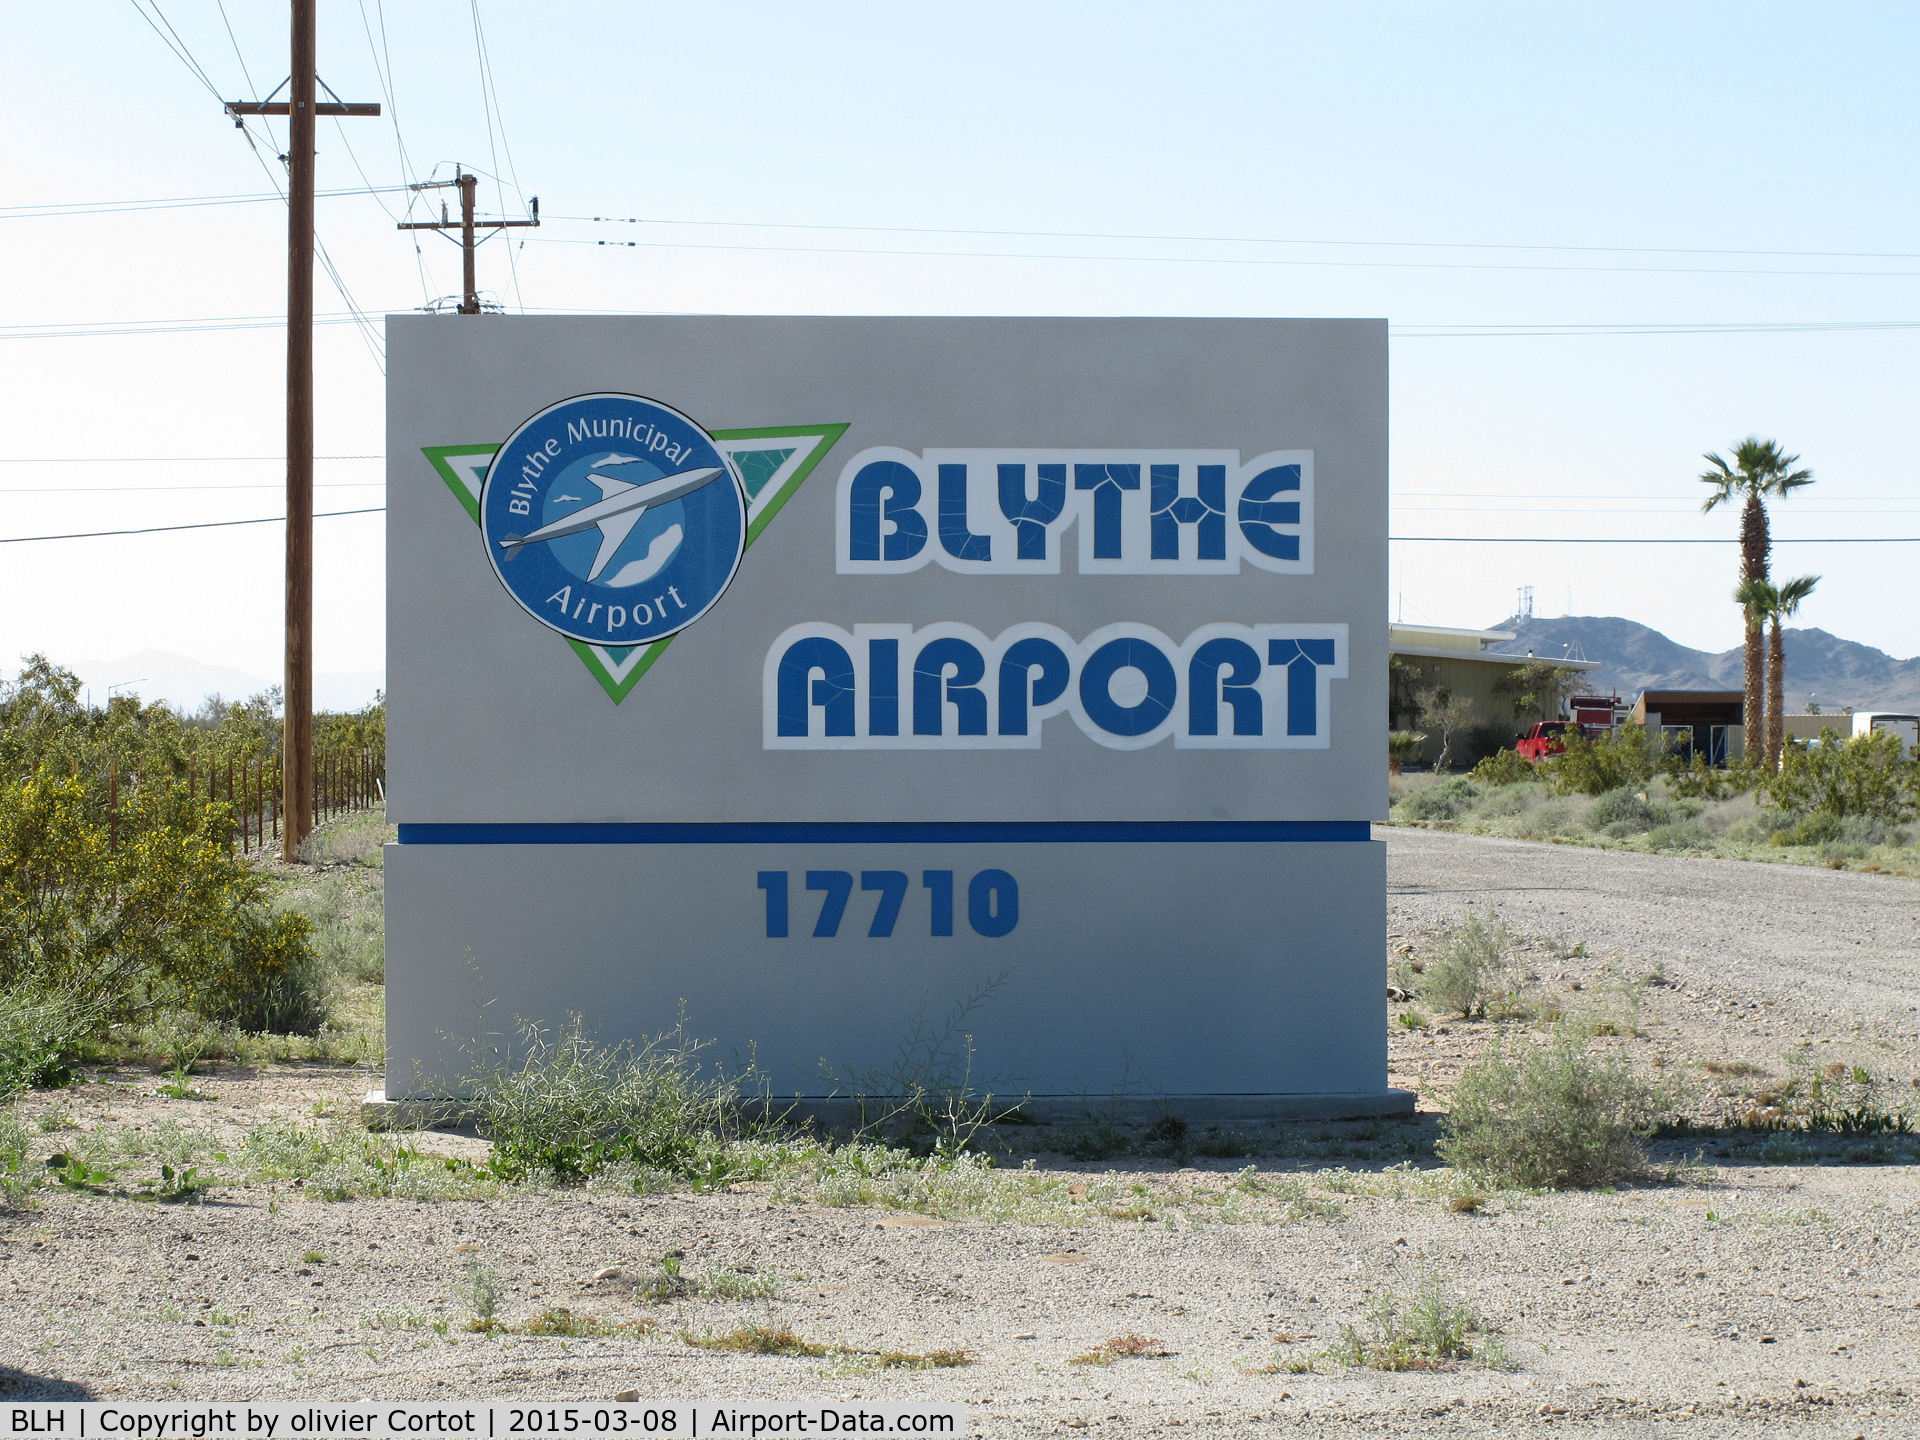 Blythe Airport (BLH) - welcome to blythe airport